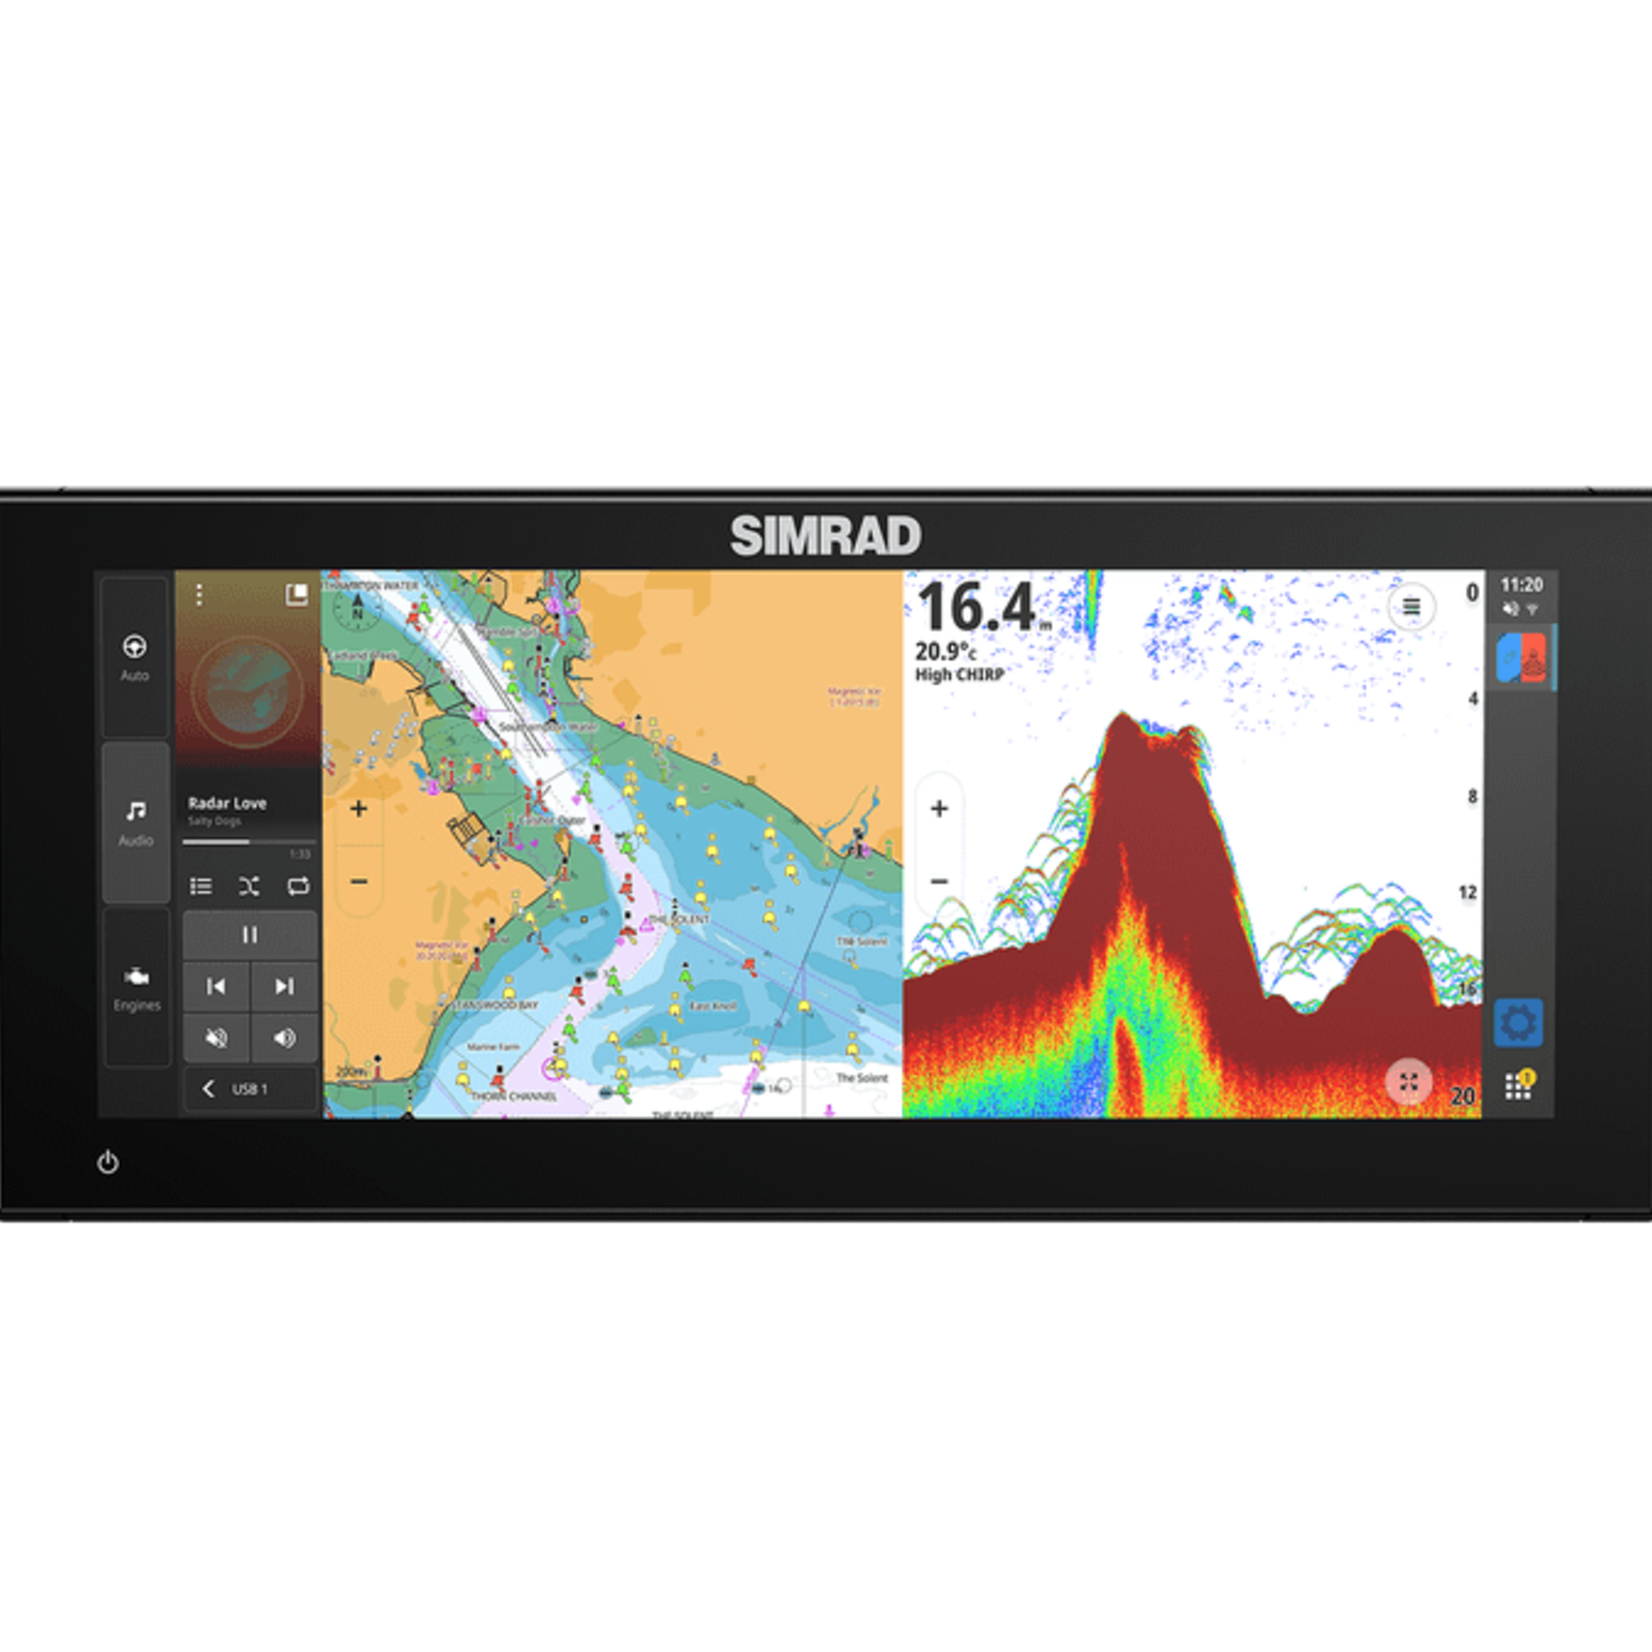 Simrad NSX® ULTRAWIDE offers a new perspective on boating. Discover an all-new aspect ratio for our most immersive experience yet.